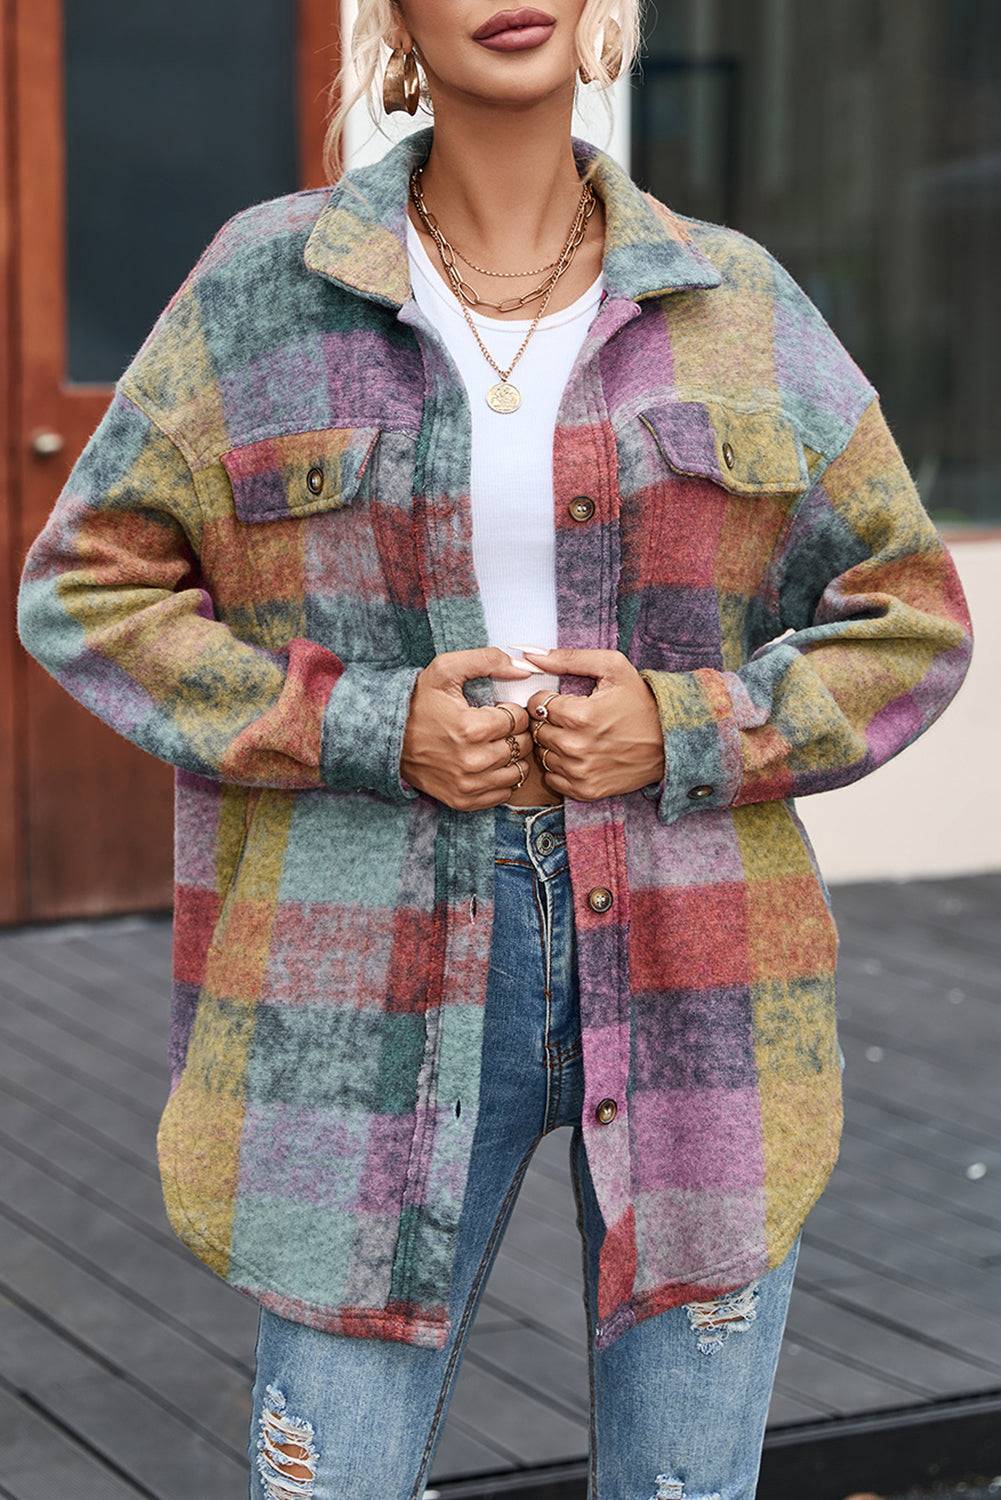 a woman wearing a multicolored jacket and ripped jeans